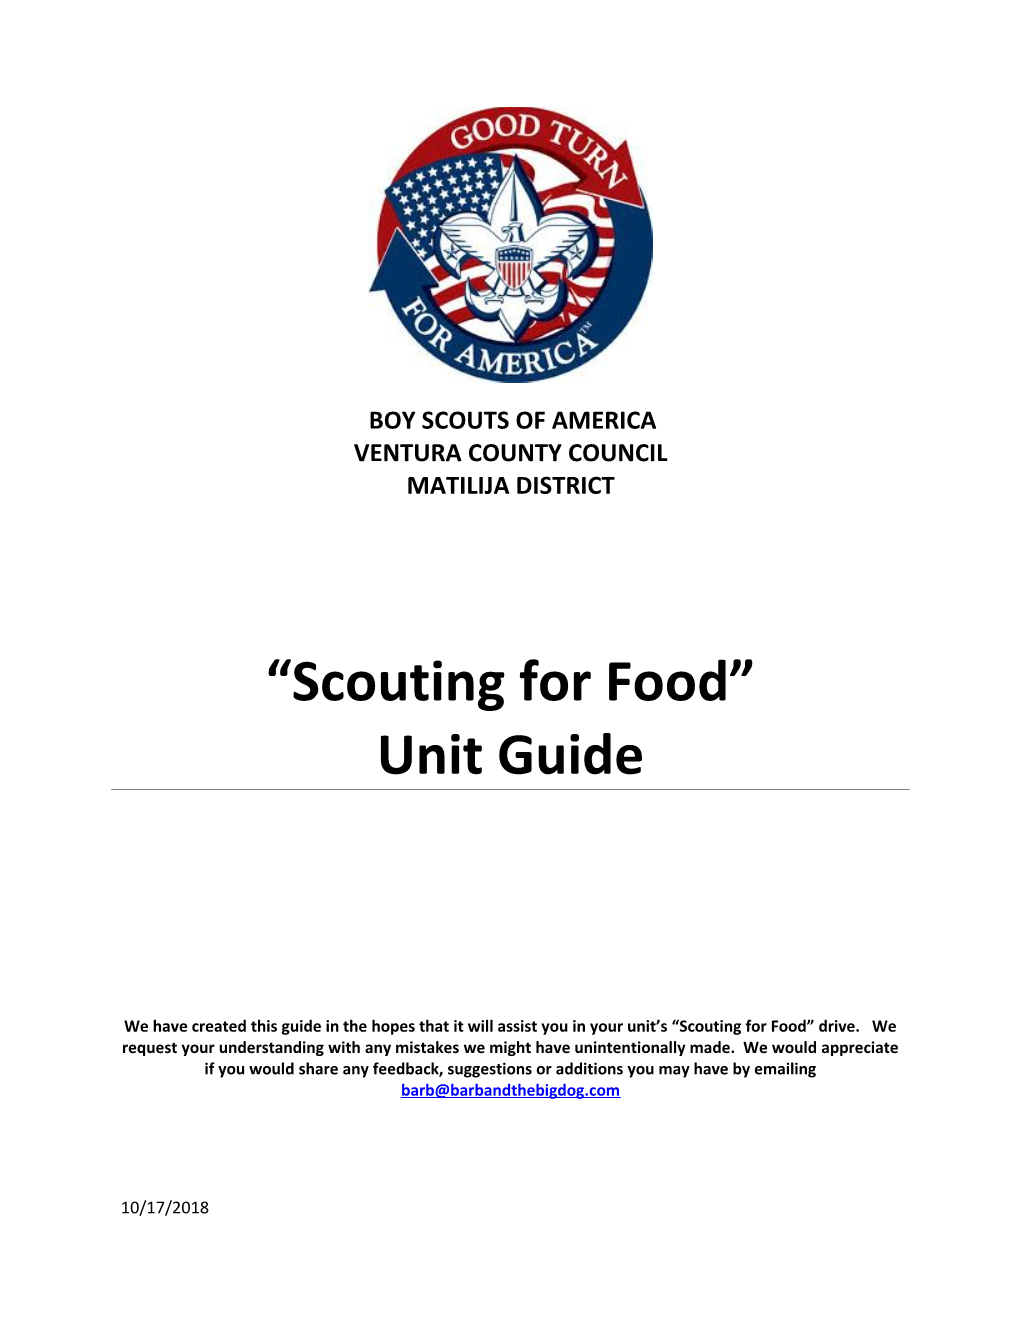 Scouting for Food 2010 Unit Guide